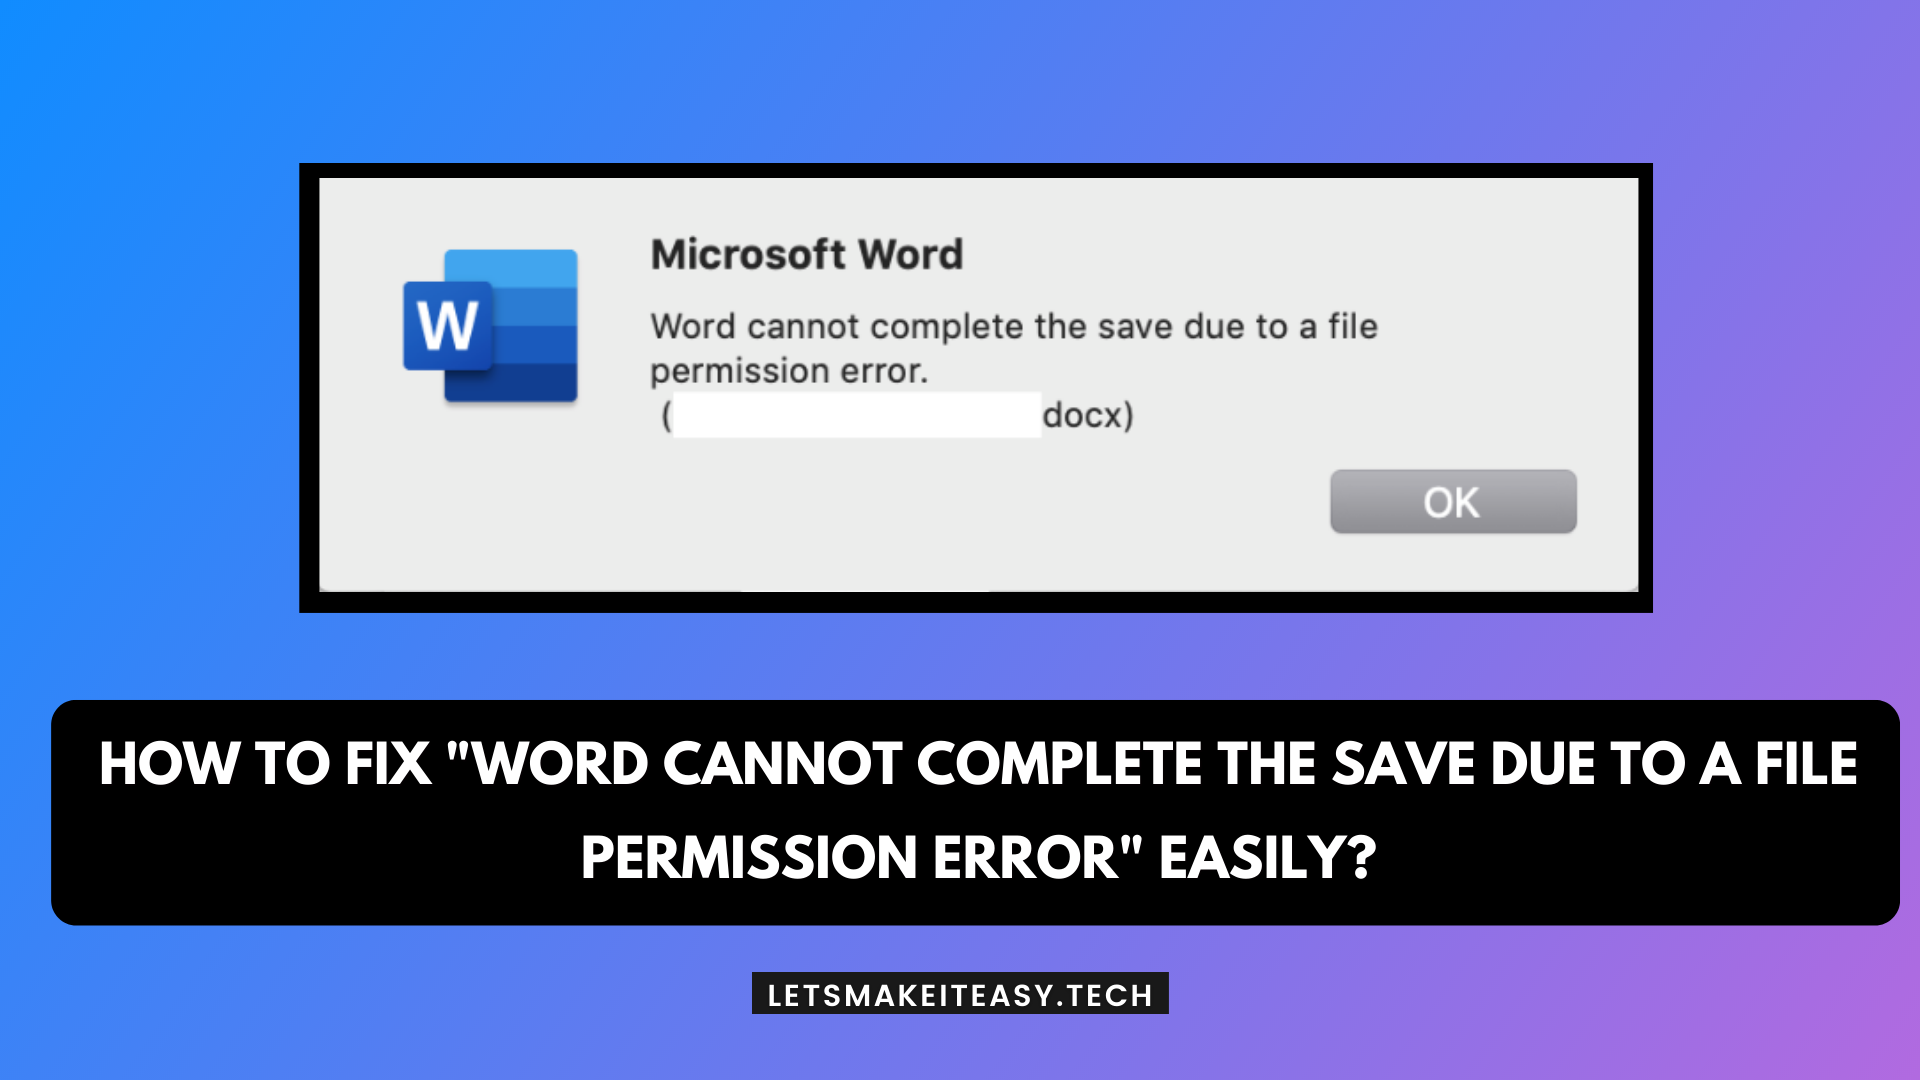 How to Fix "Word Cannot Complete the Save Due to a File Permission Error" Easily?